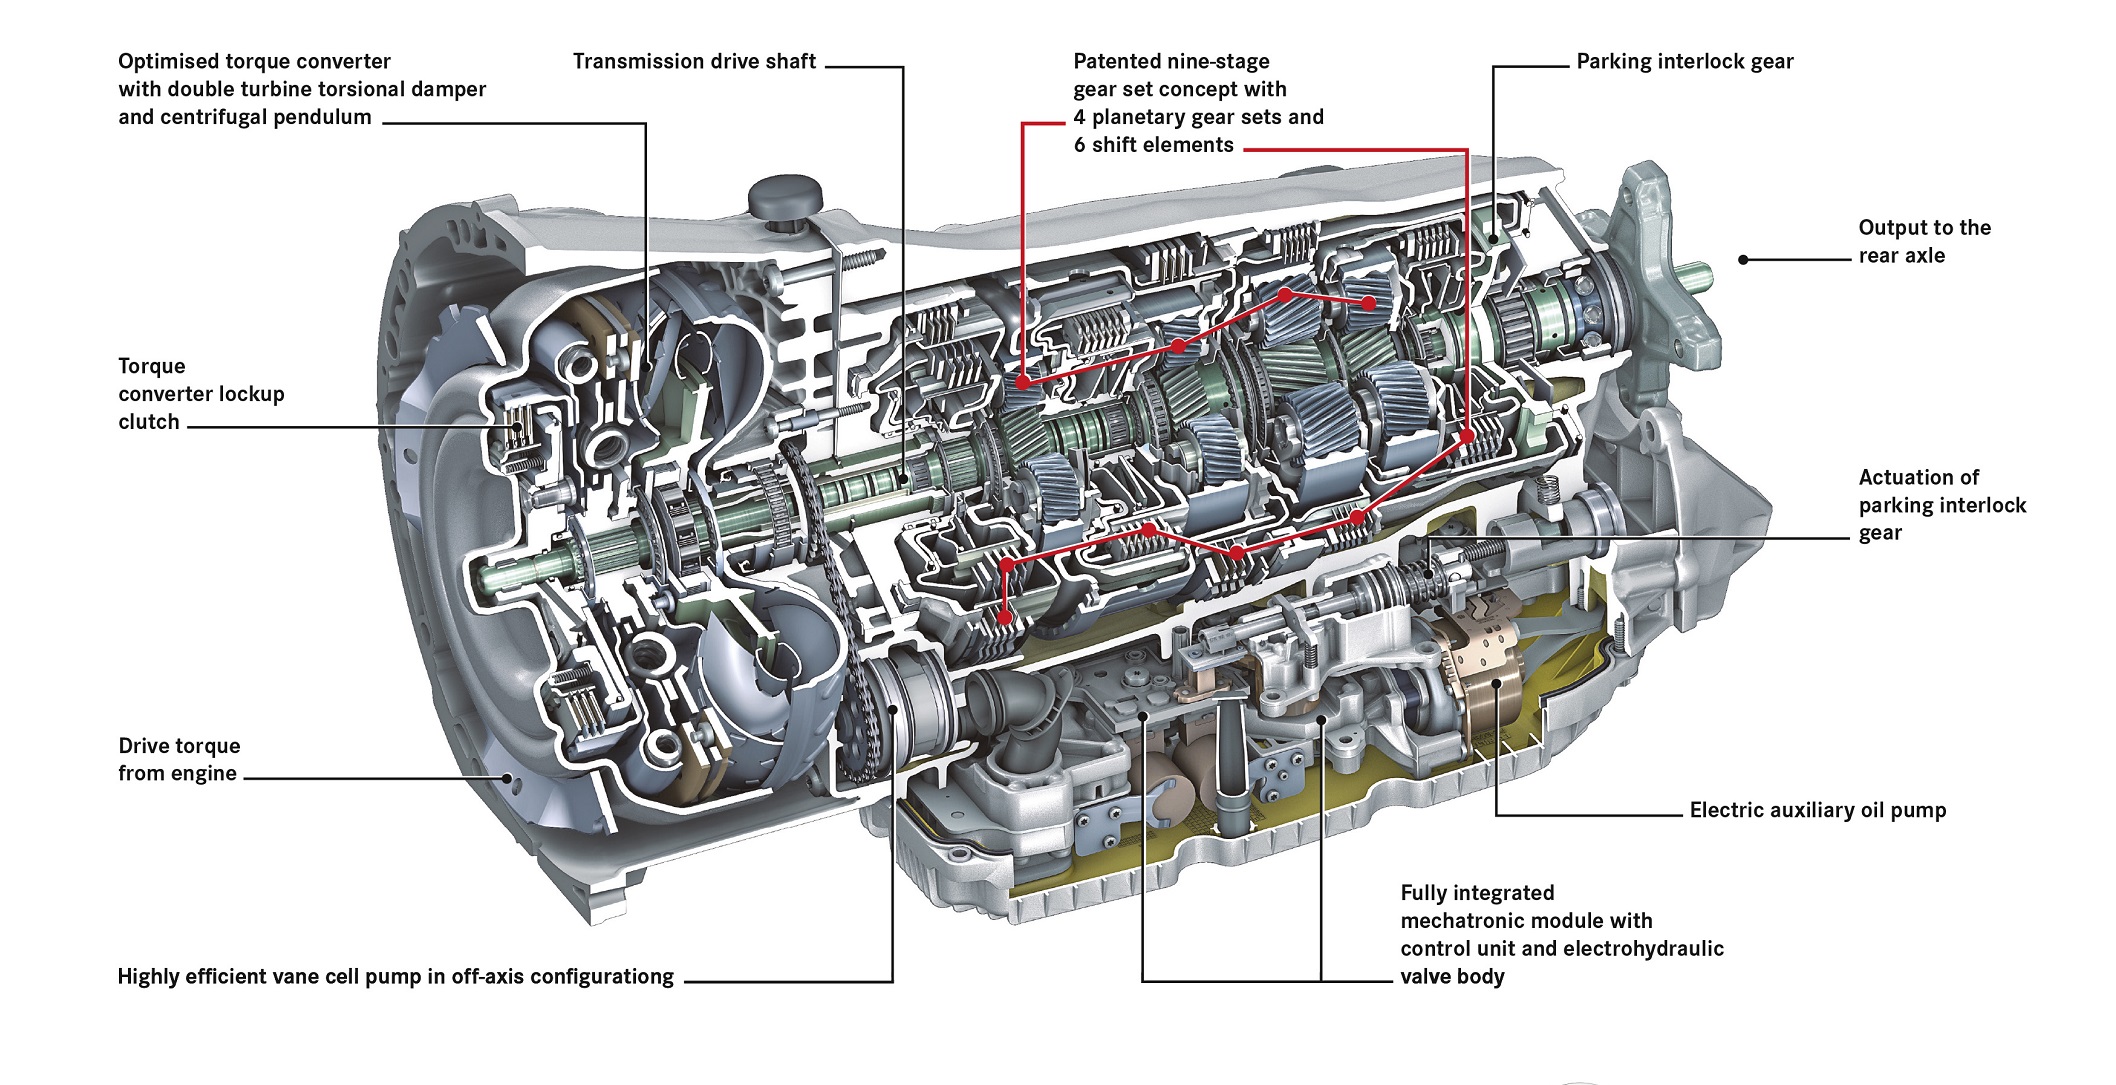 Design-of-the-Mercedes-Benz-automatic-transmission-9G-TRONIC.jpg